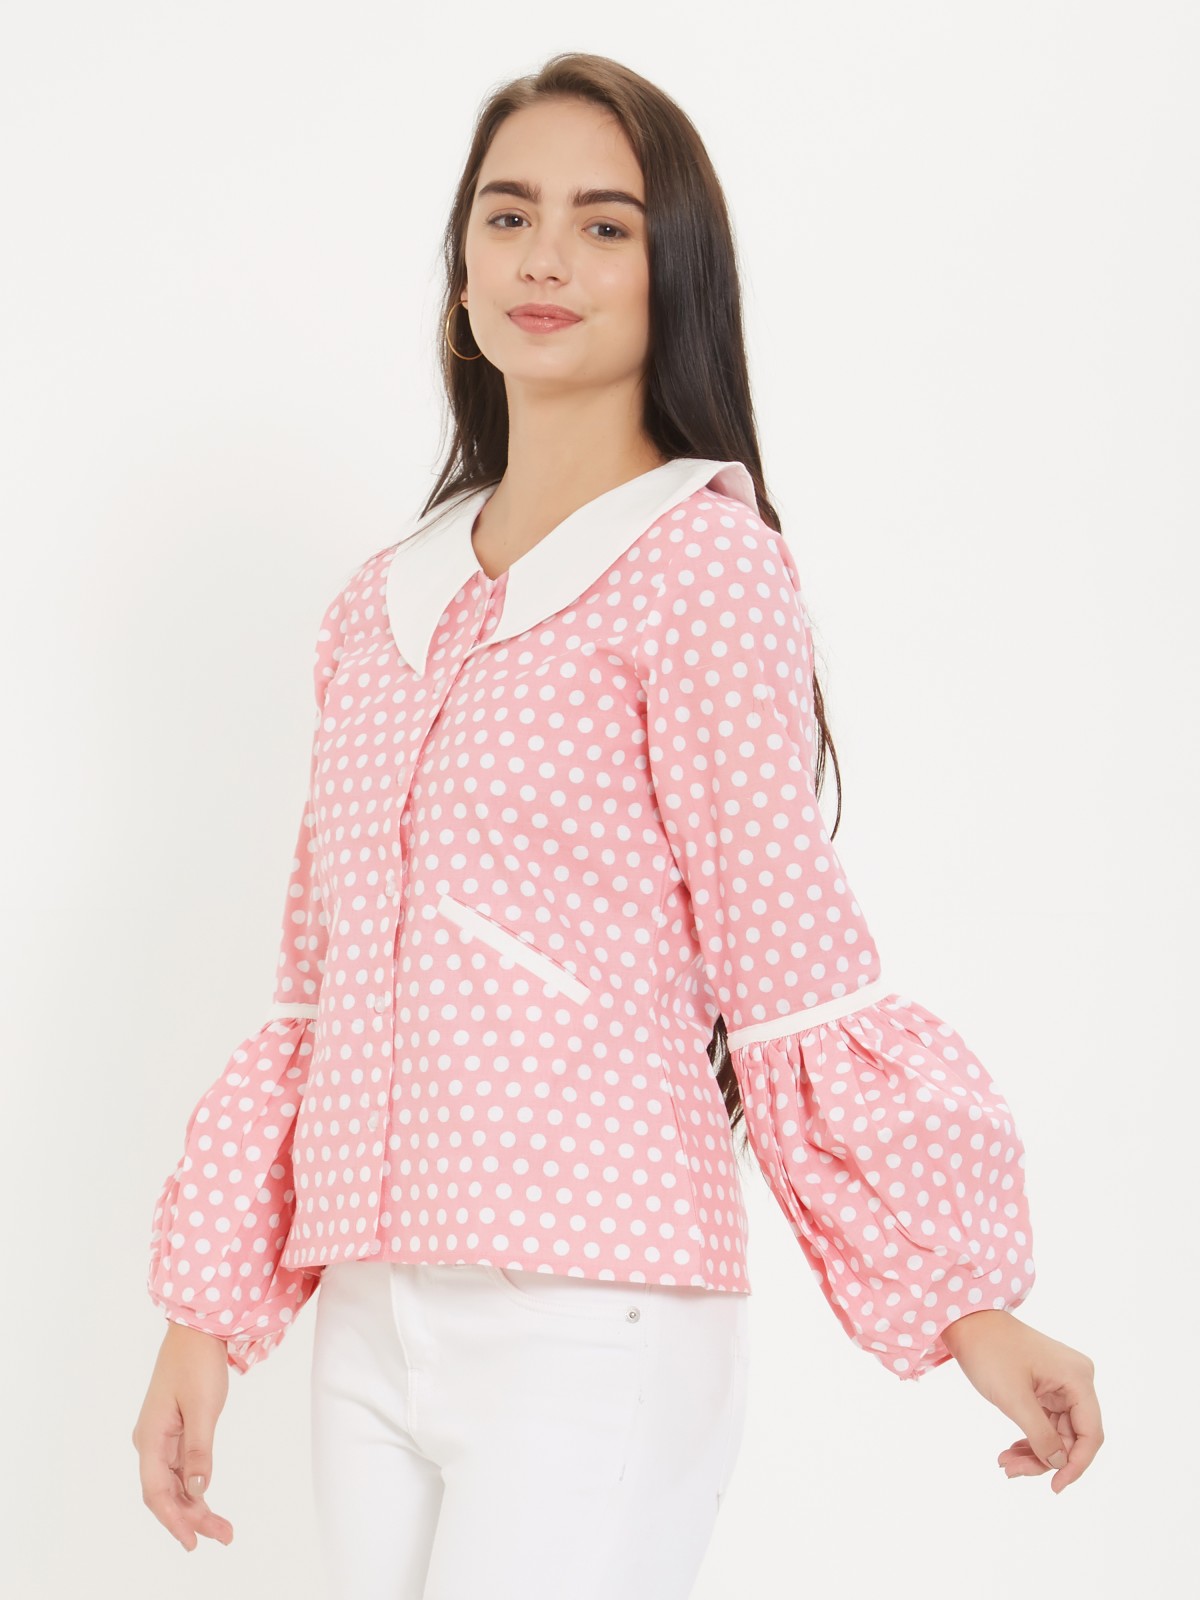  Exclusive Cotton Linen Vintage Styled Pink Polka Dots Top